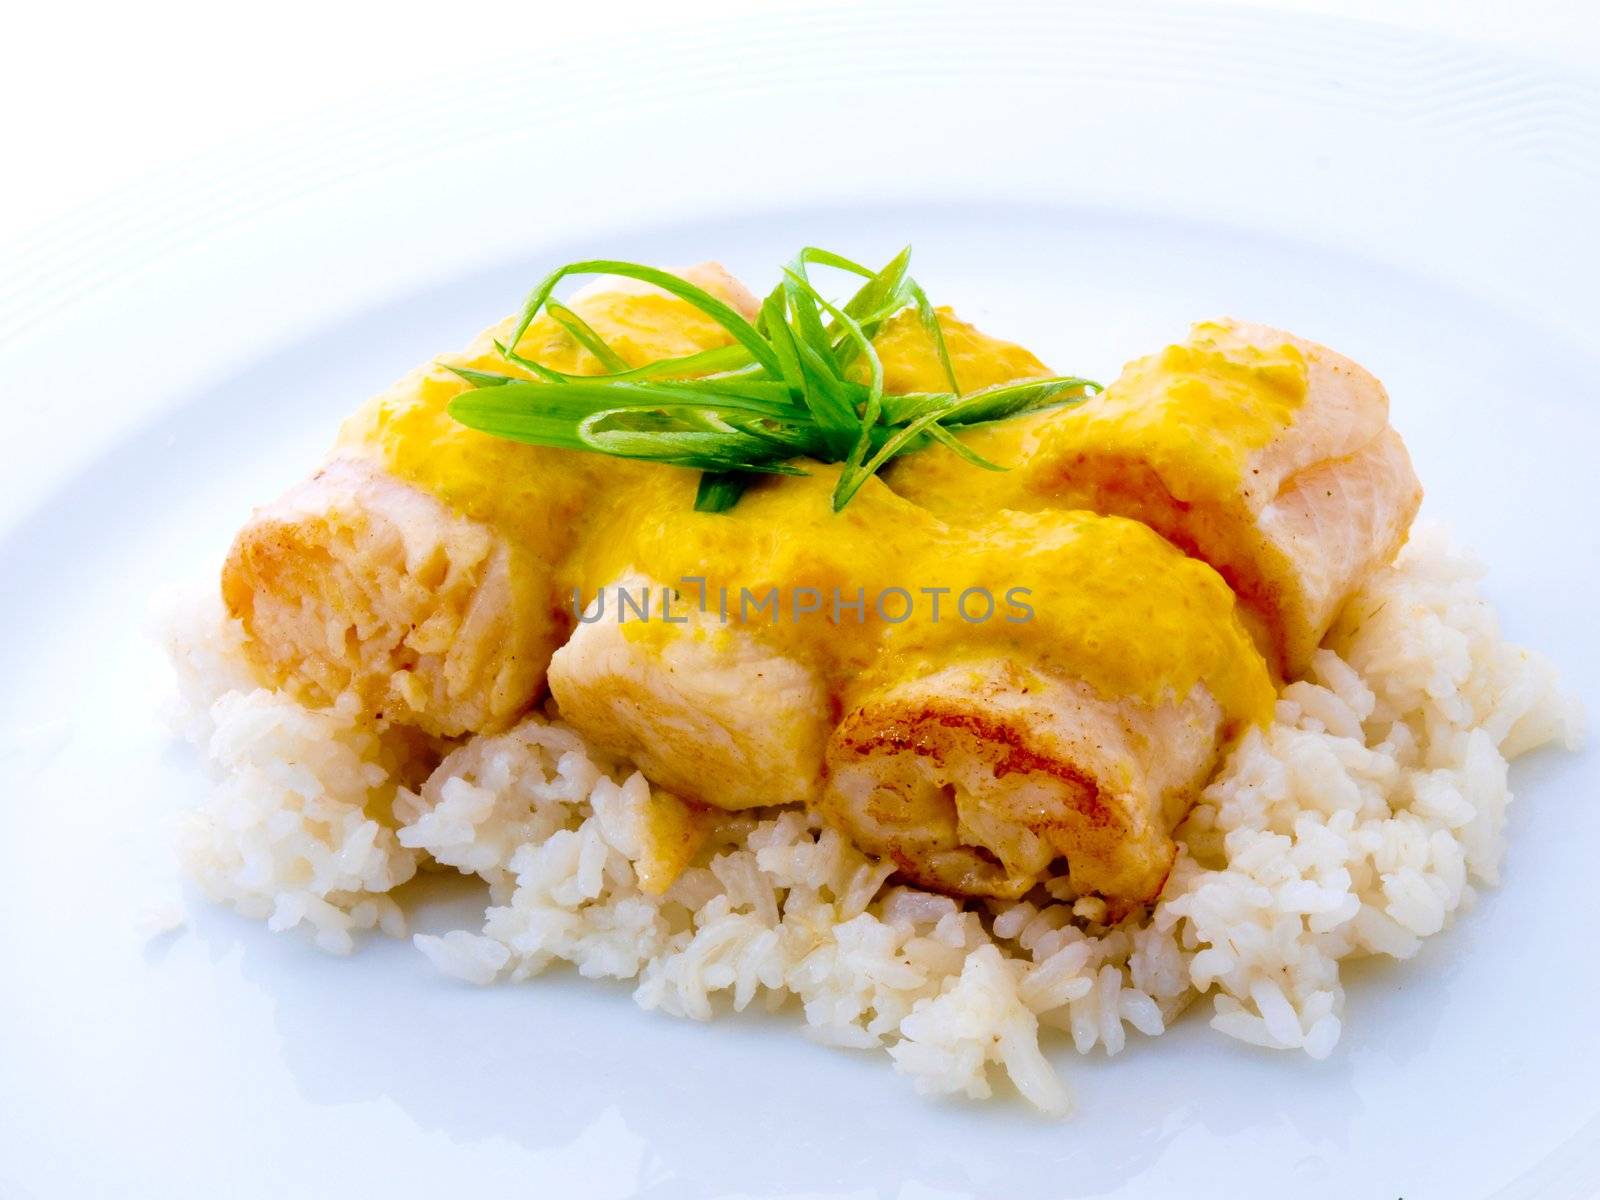 Rolled fish with rice by cocoyjurado9000